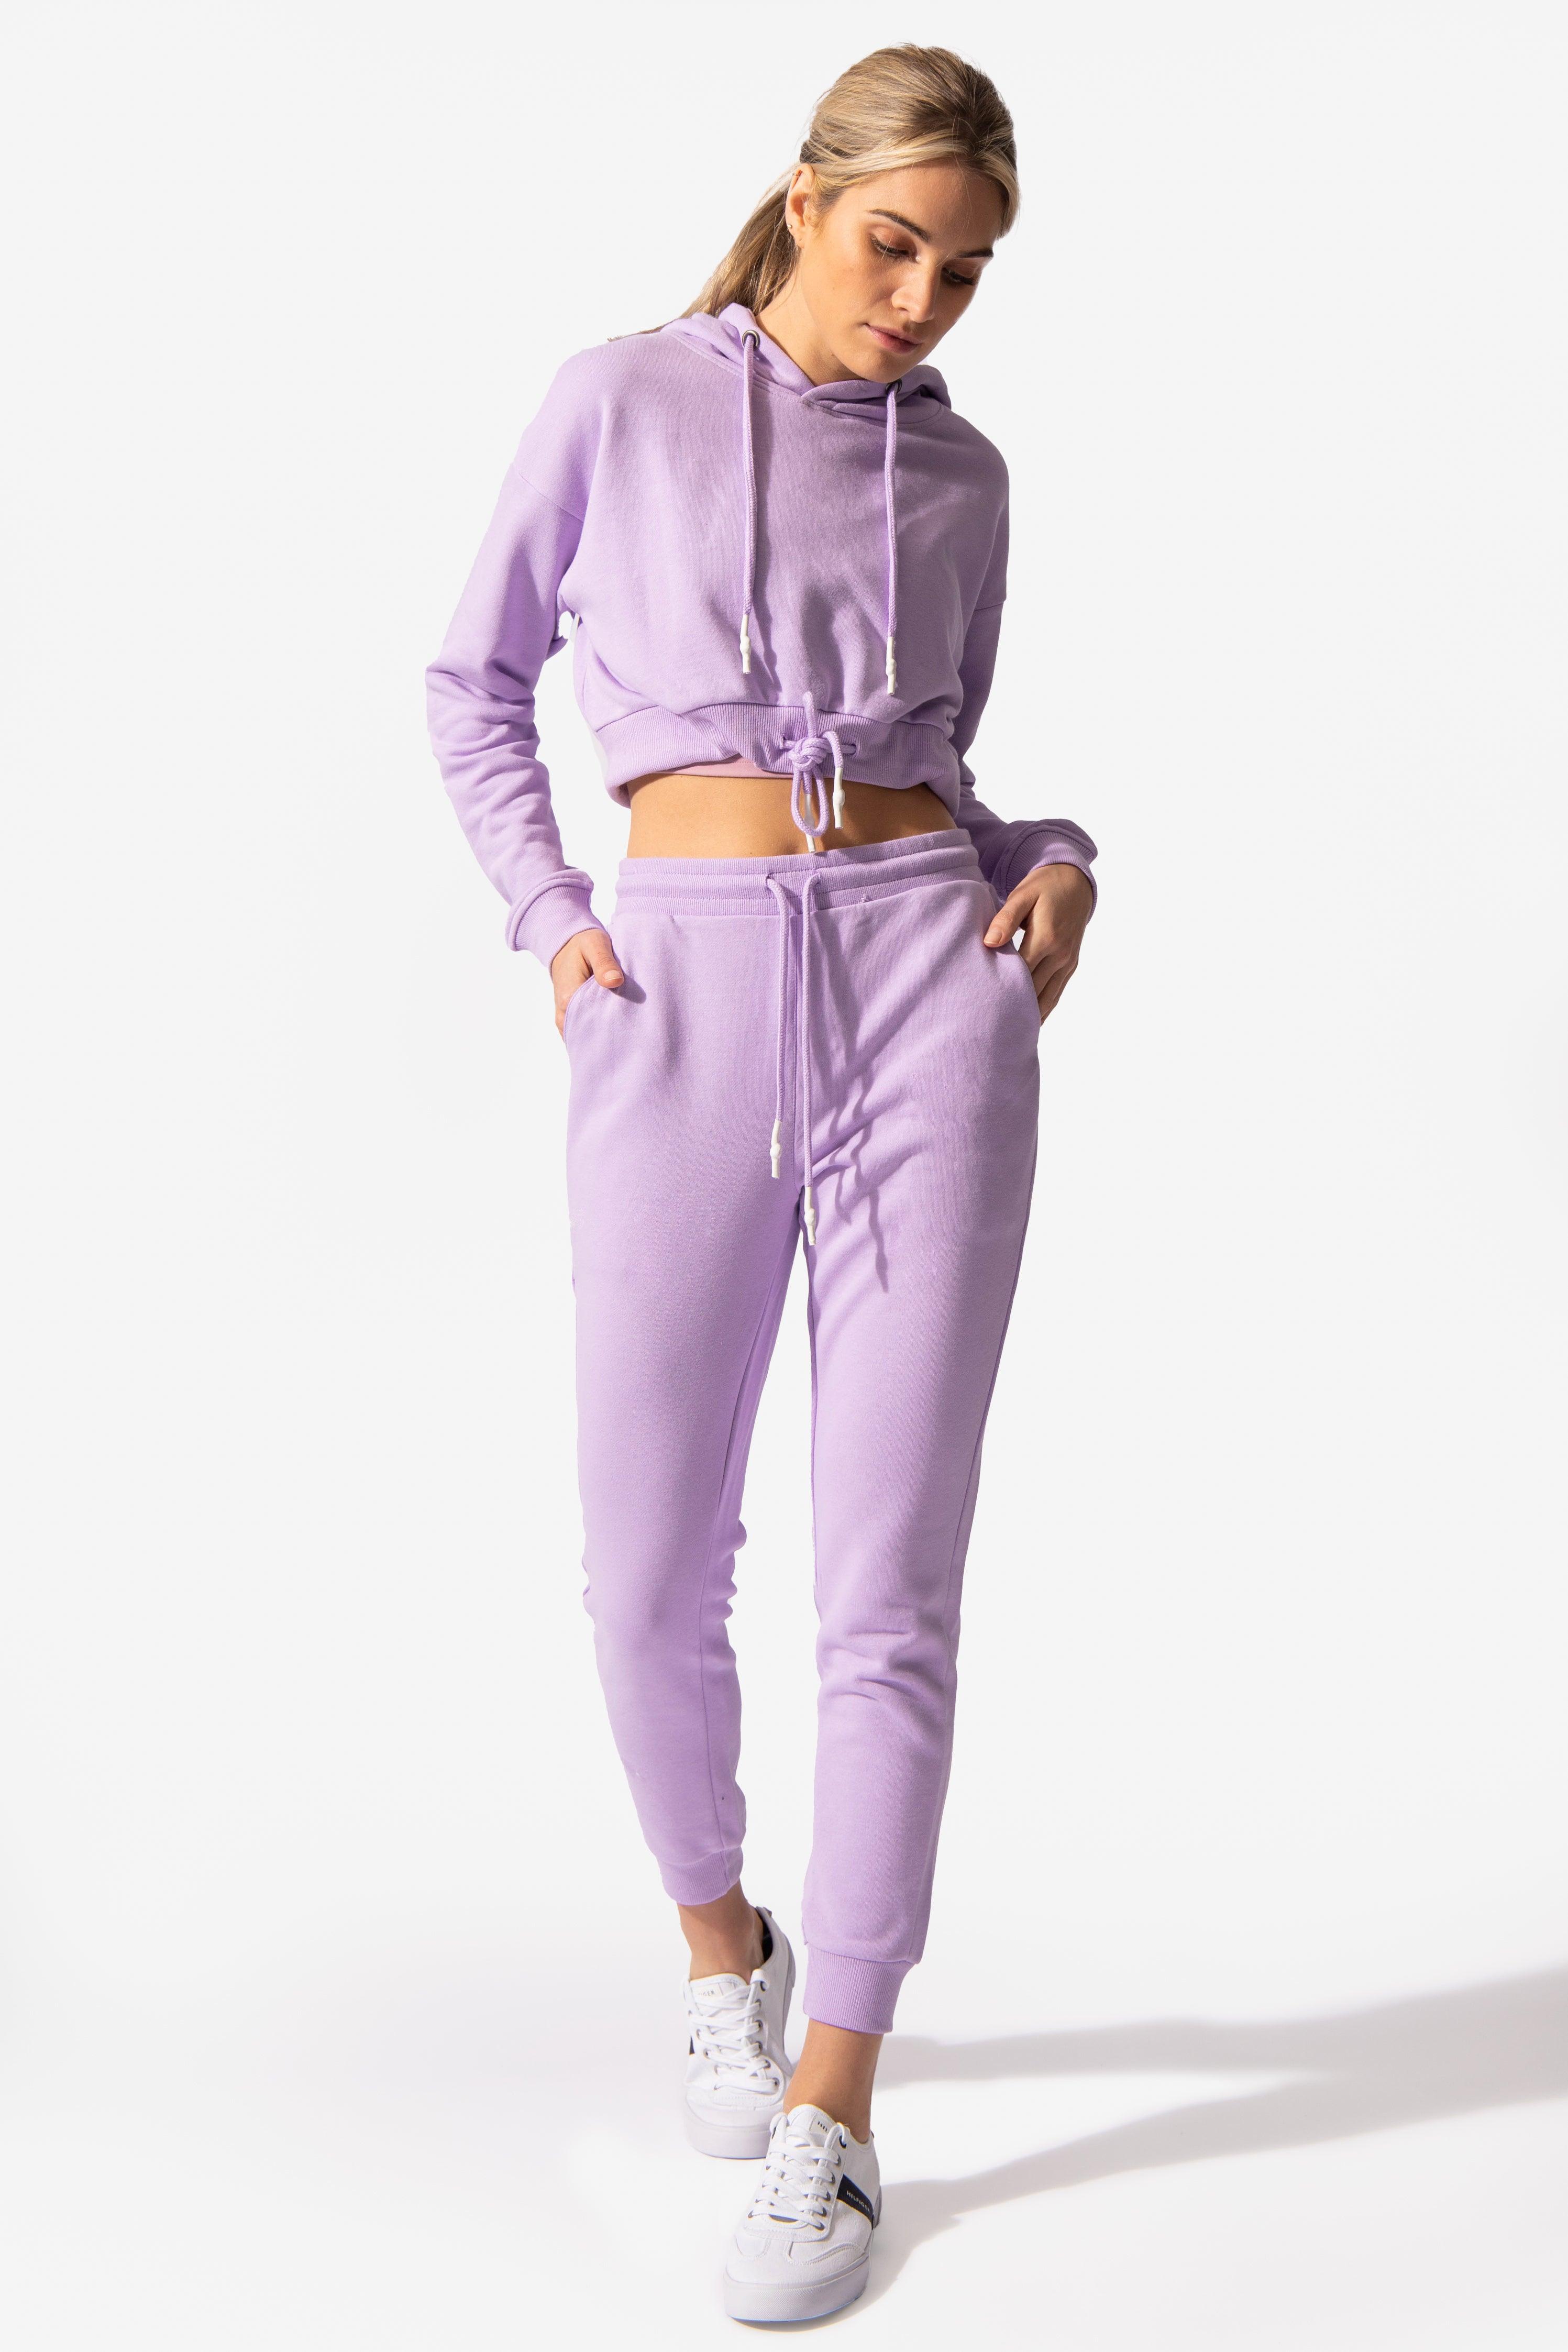 Wild Dreams Stretchy Lounge Joggers - Purple - Jed North Canada